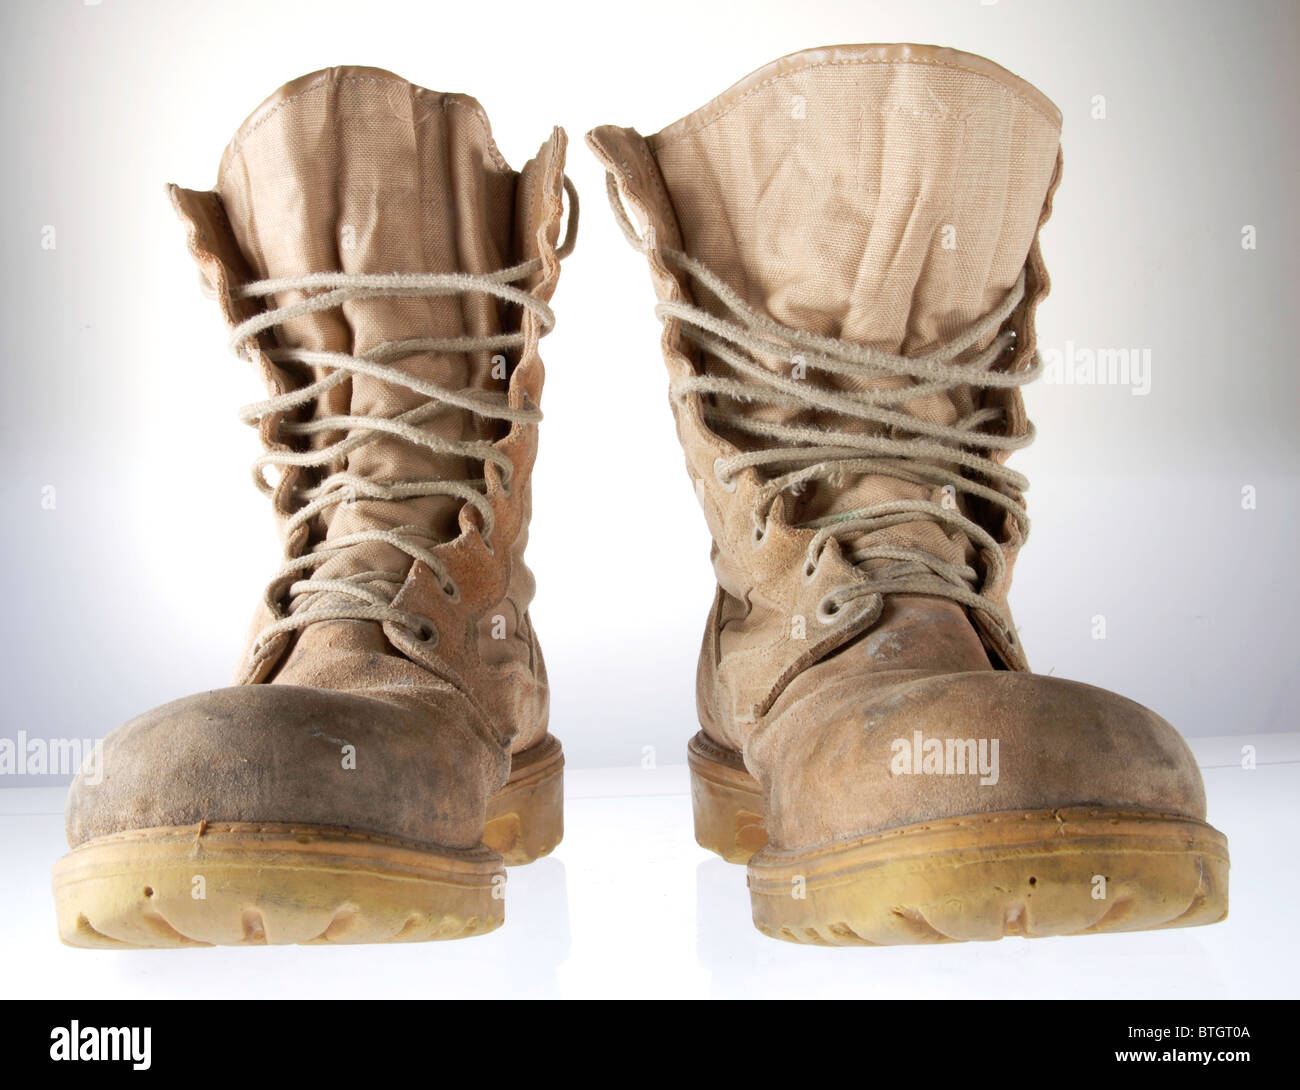 Army Desert Boots High Resolution Stock Photography and Images - Alamy